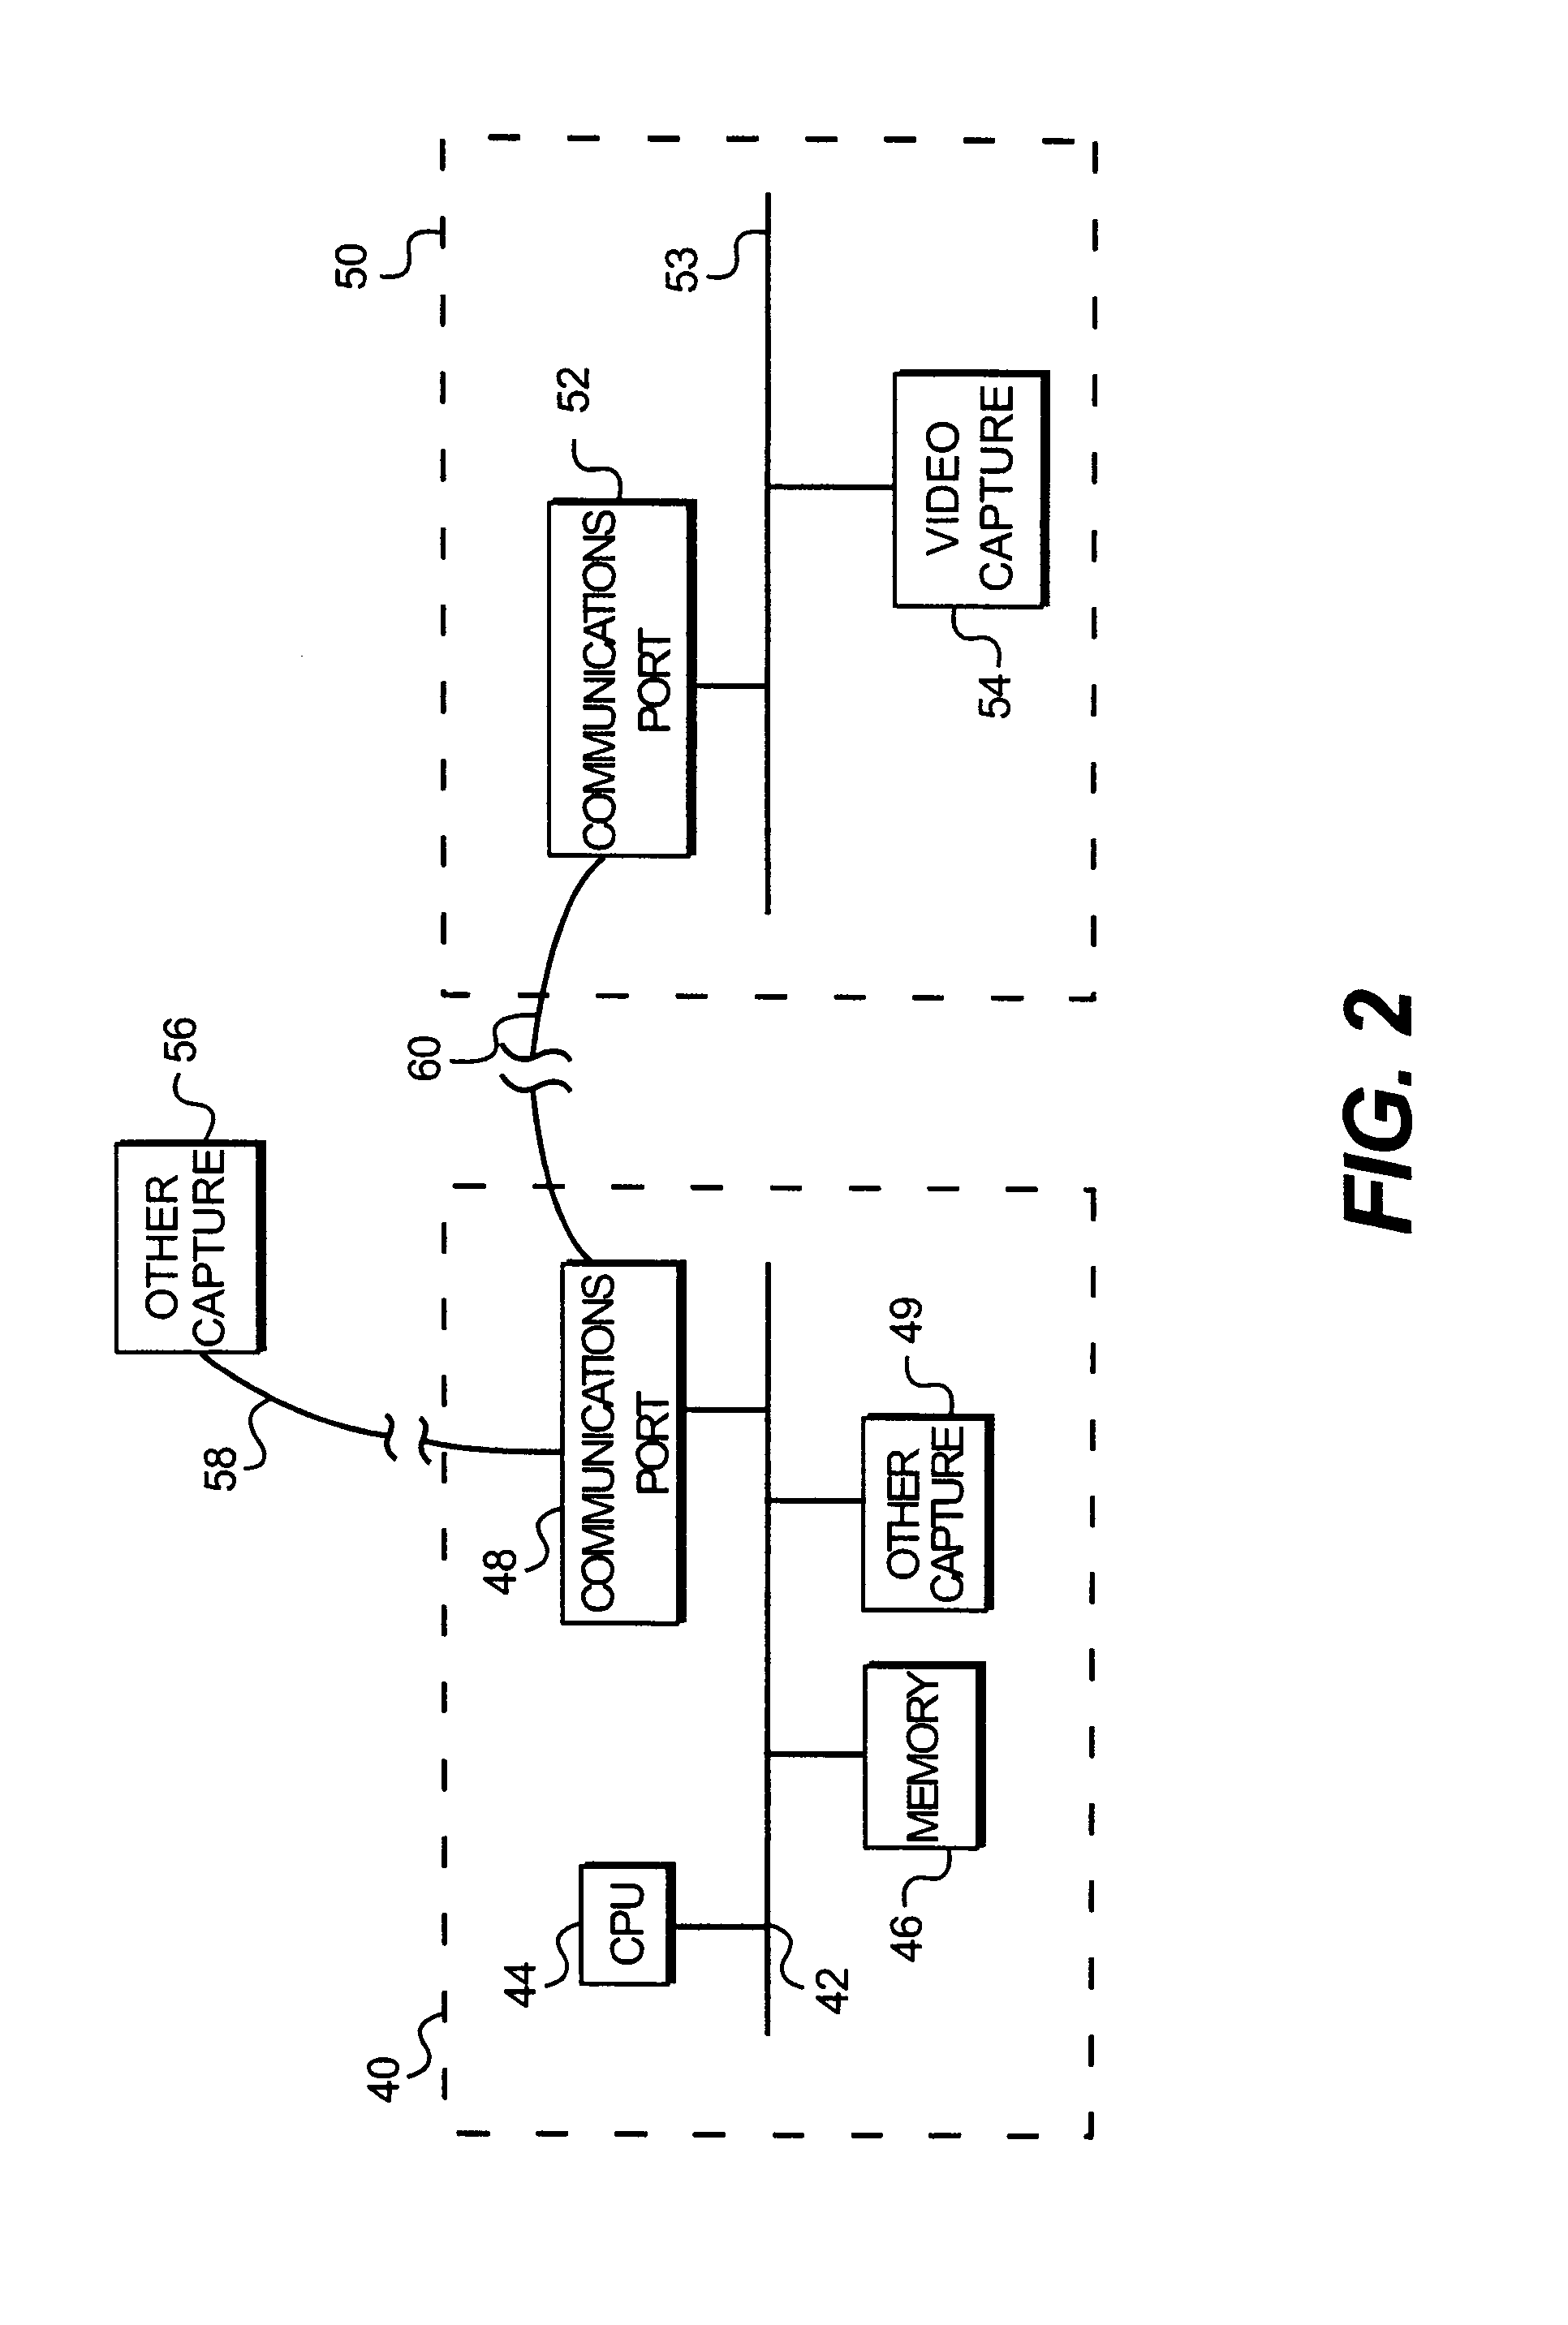 Method and system for video capture of vehicle information